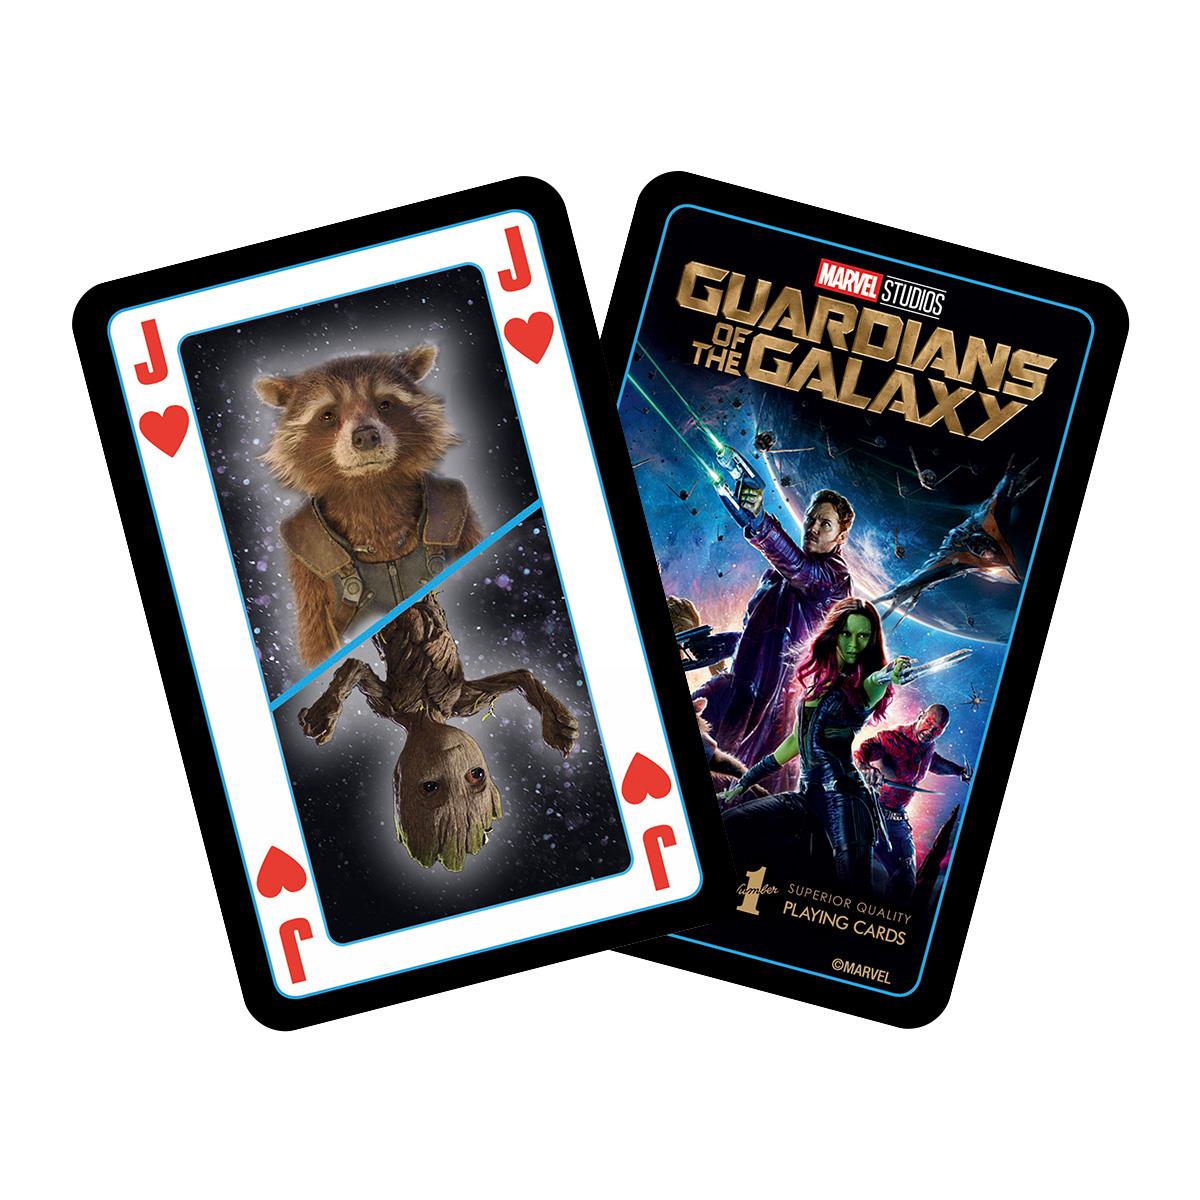 Guardians of the Galaxy Waddingtons Number 1 Playing Cards